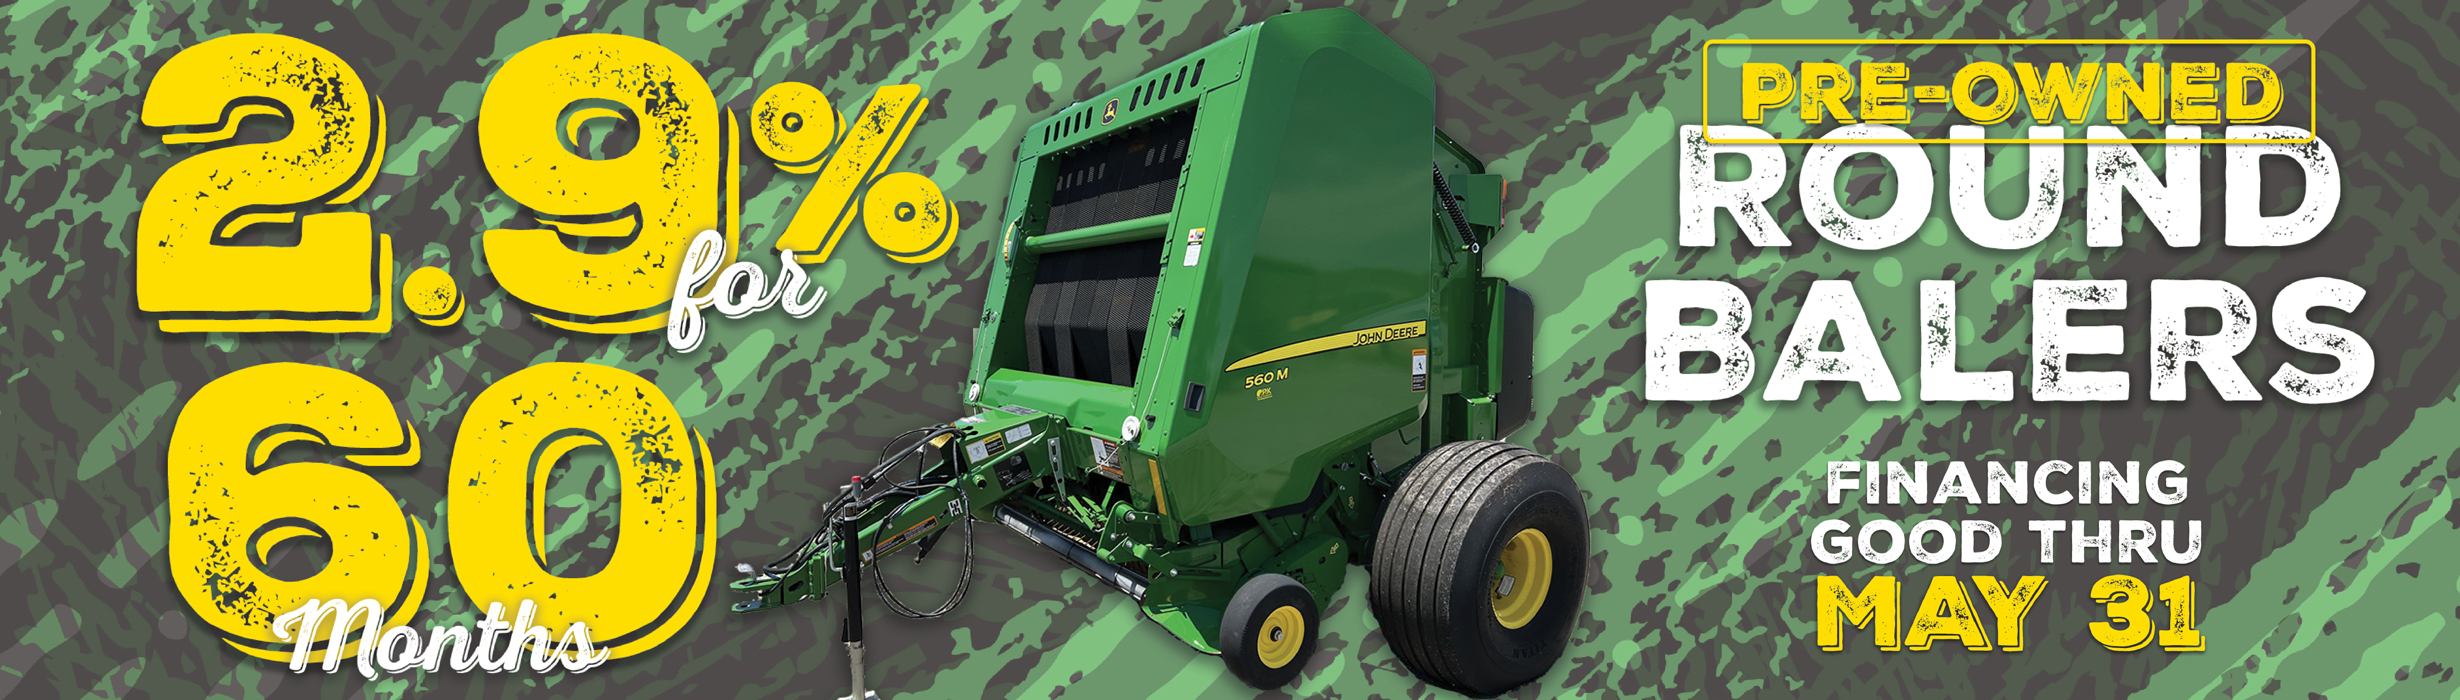 Get 2.9% for 60 months on Pre-Owned Balers